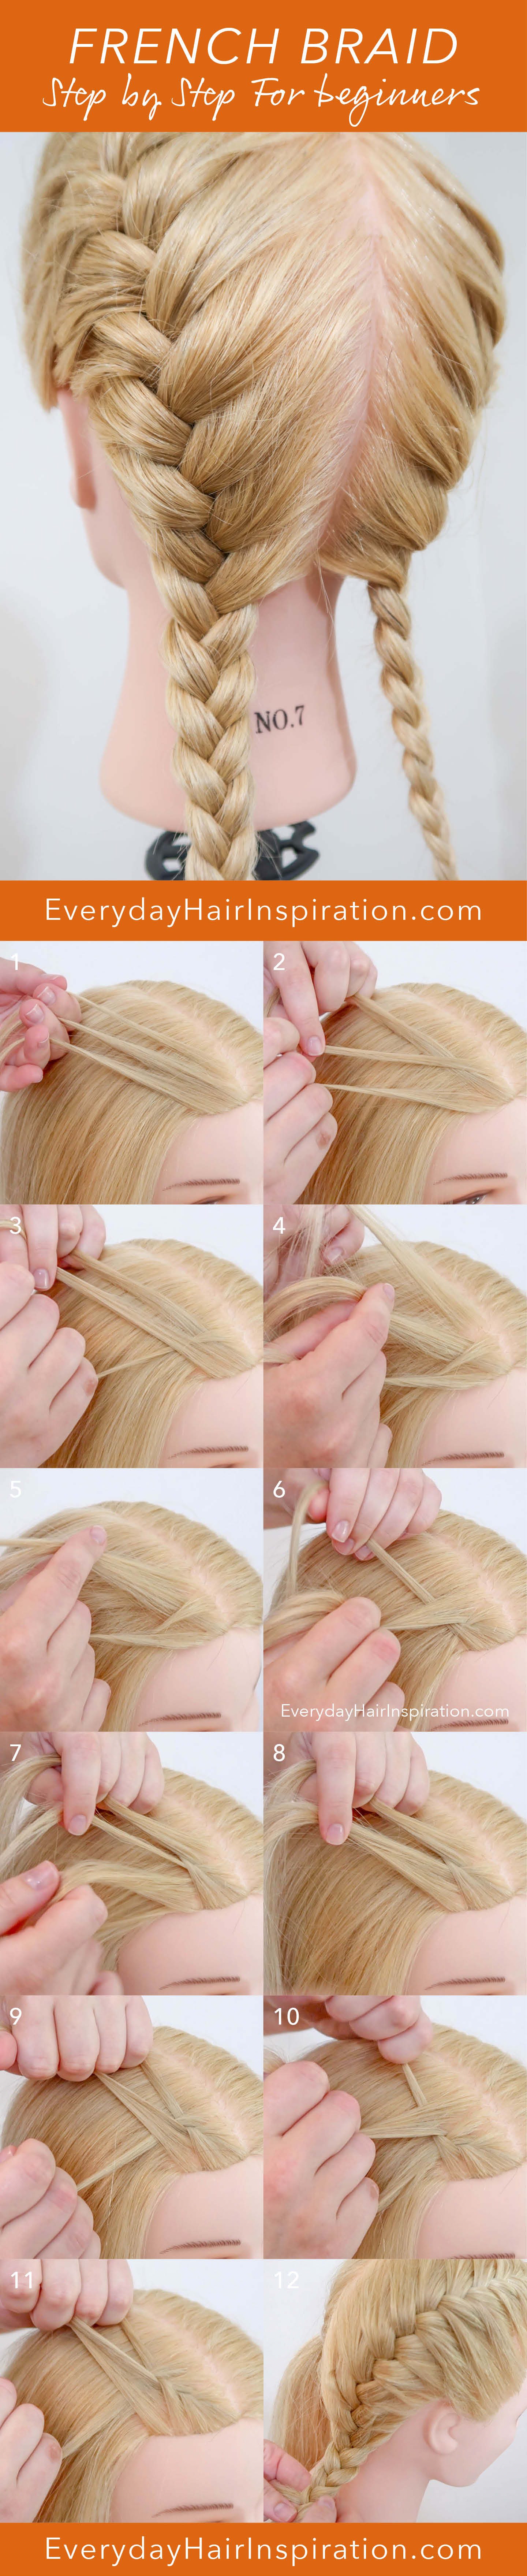 How to French Braid Your Hair: The Complete Beginner's Tutorial